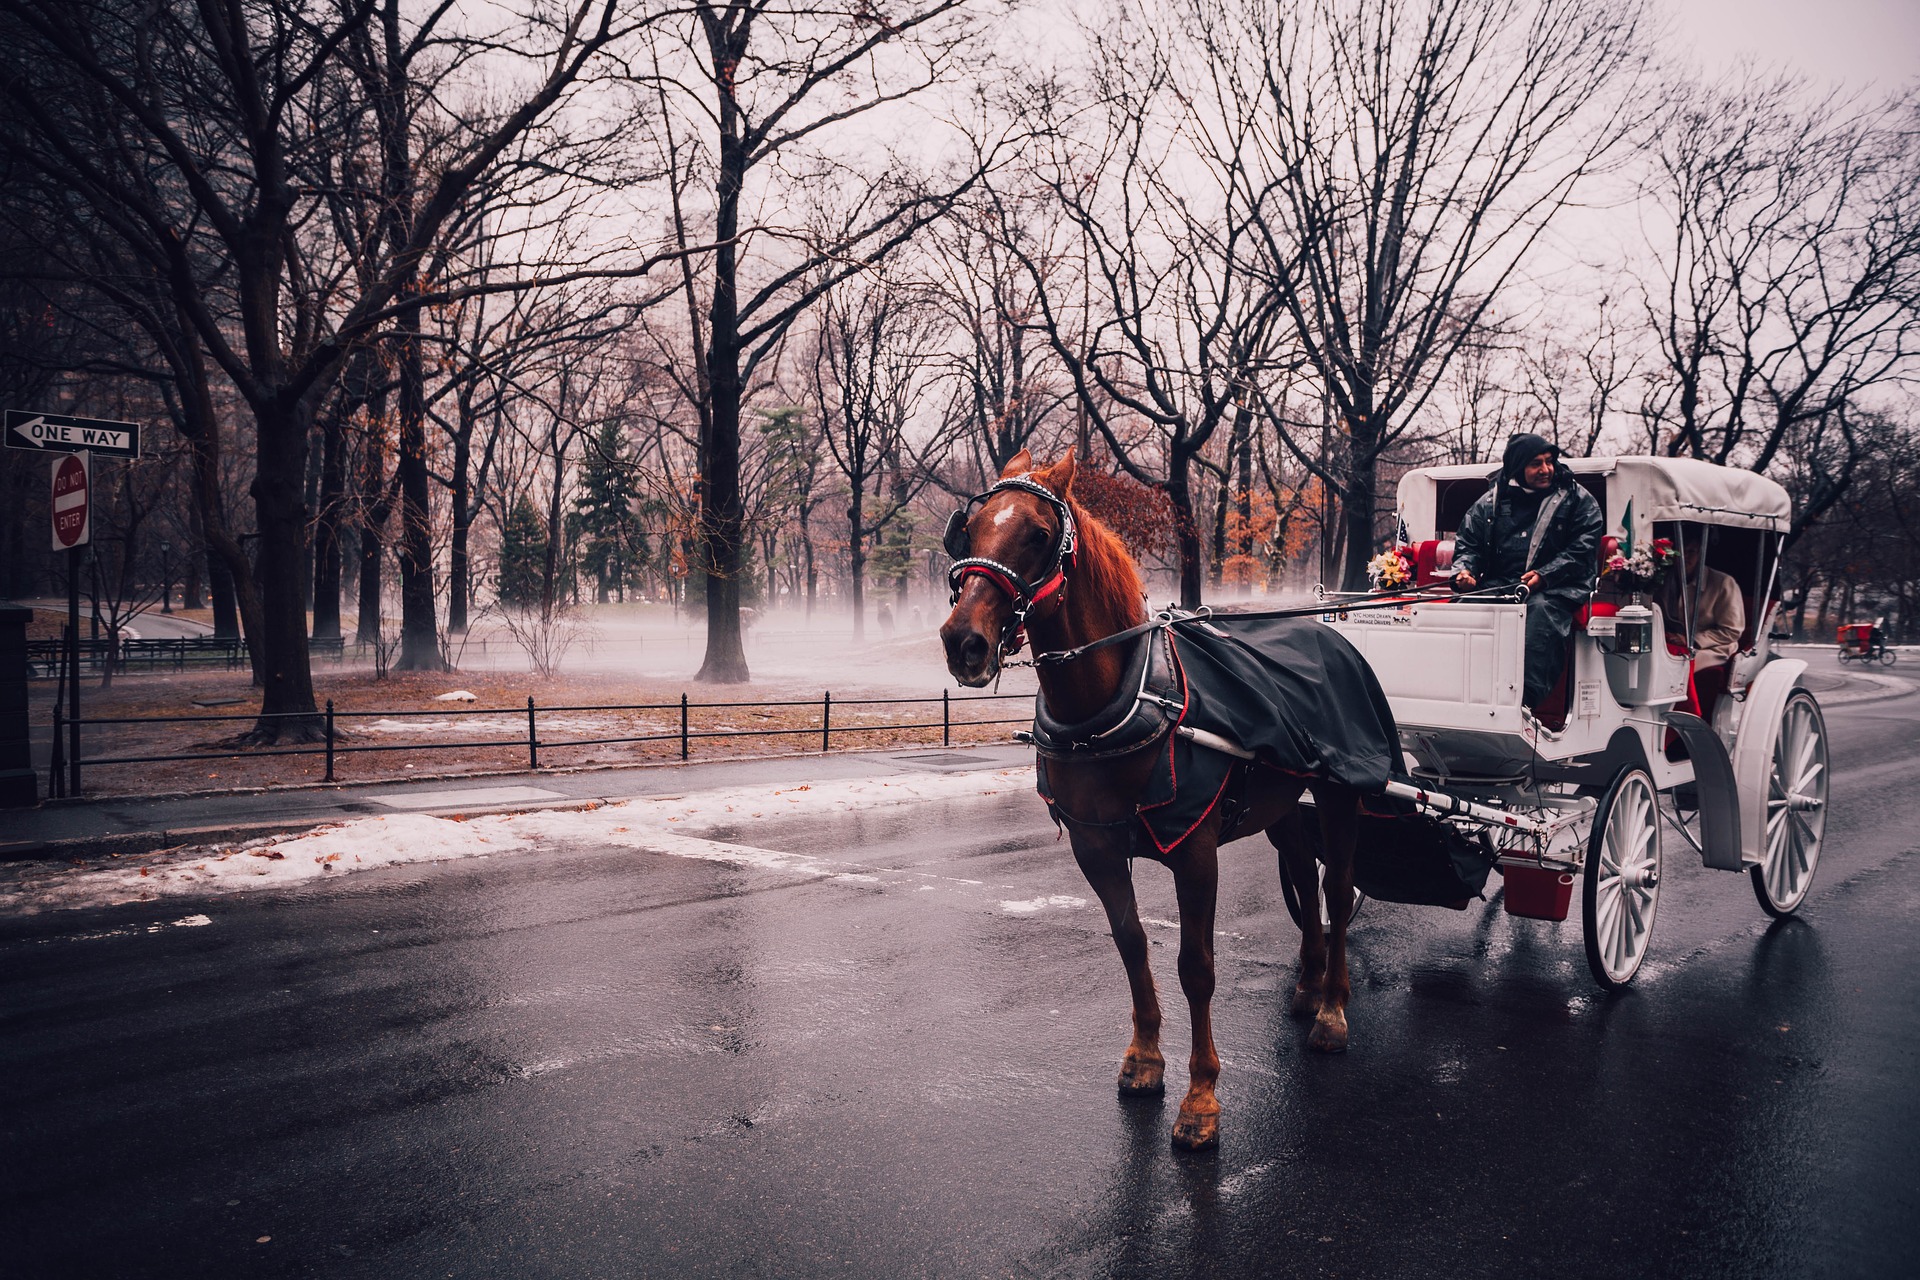 Horse-drawn carriage rides in Central Park? Yes please!